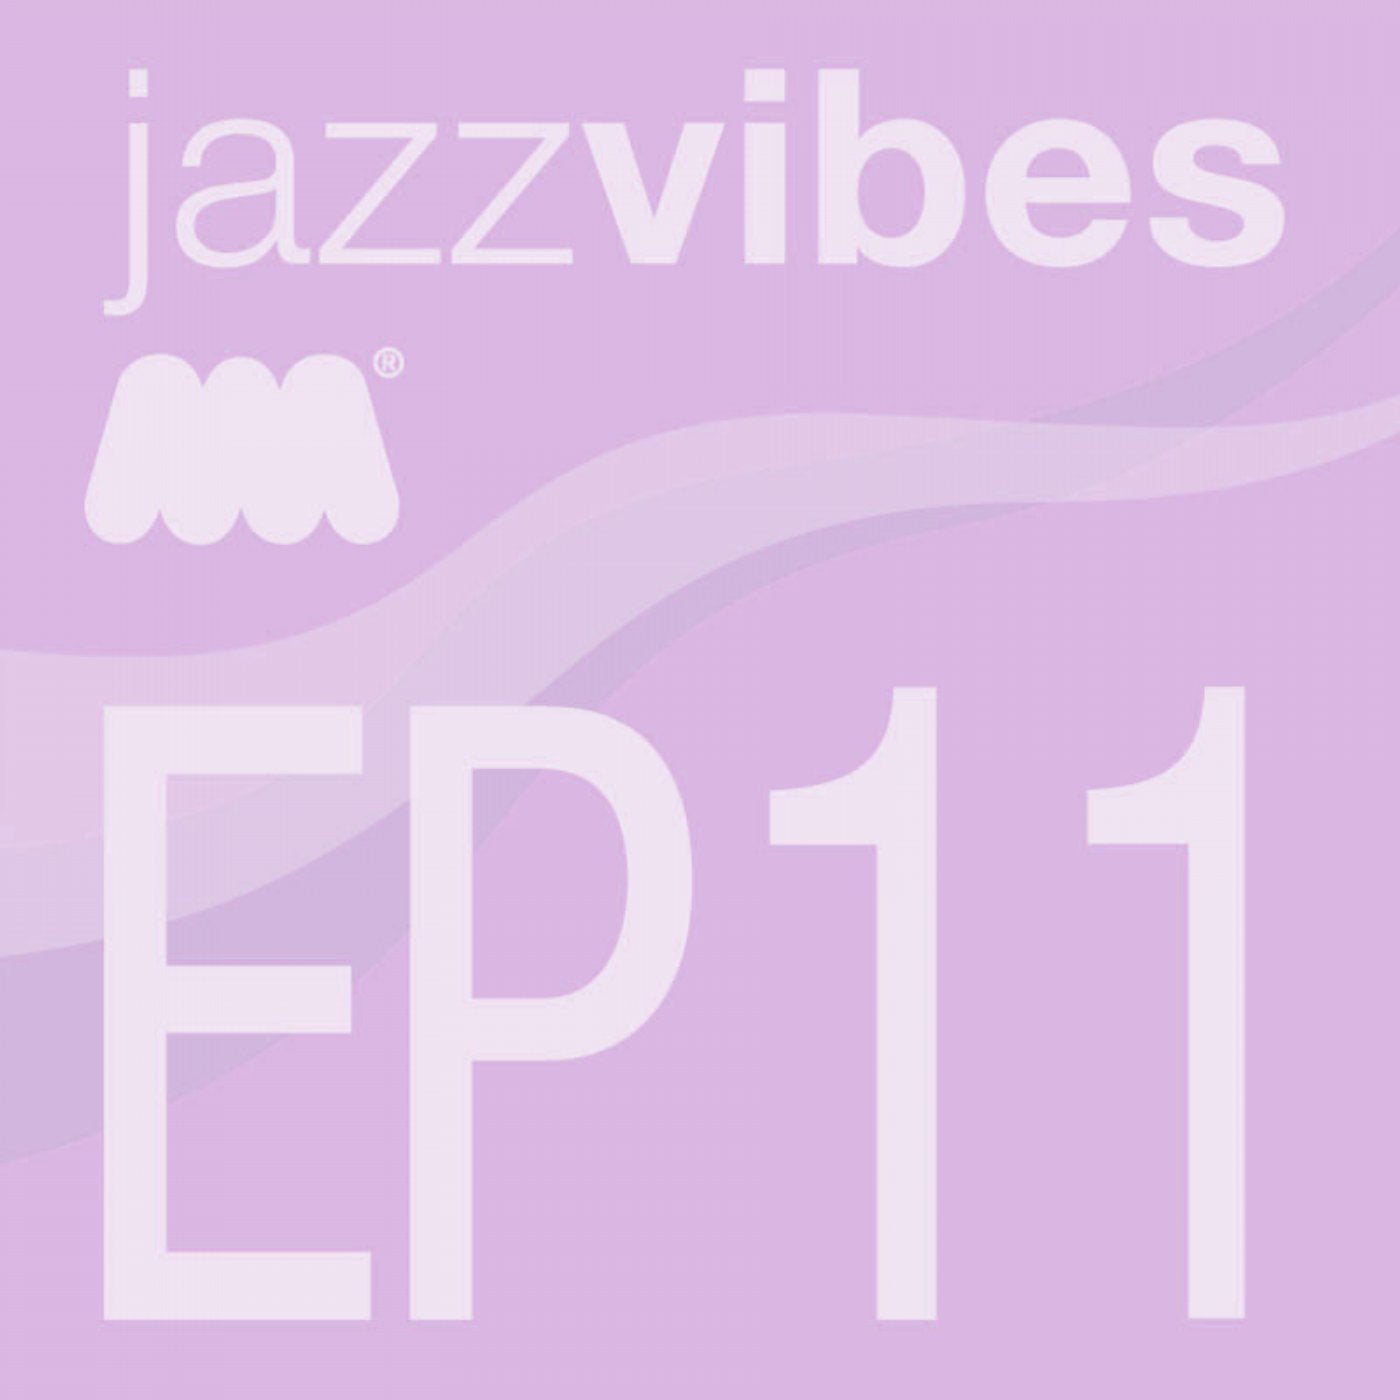 Vibe 11. Jazz Vibes. Music collection.